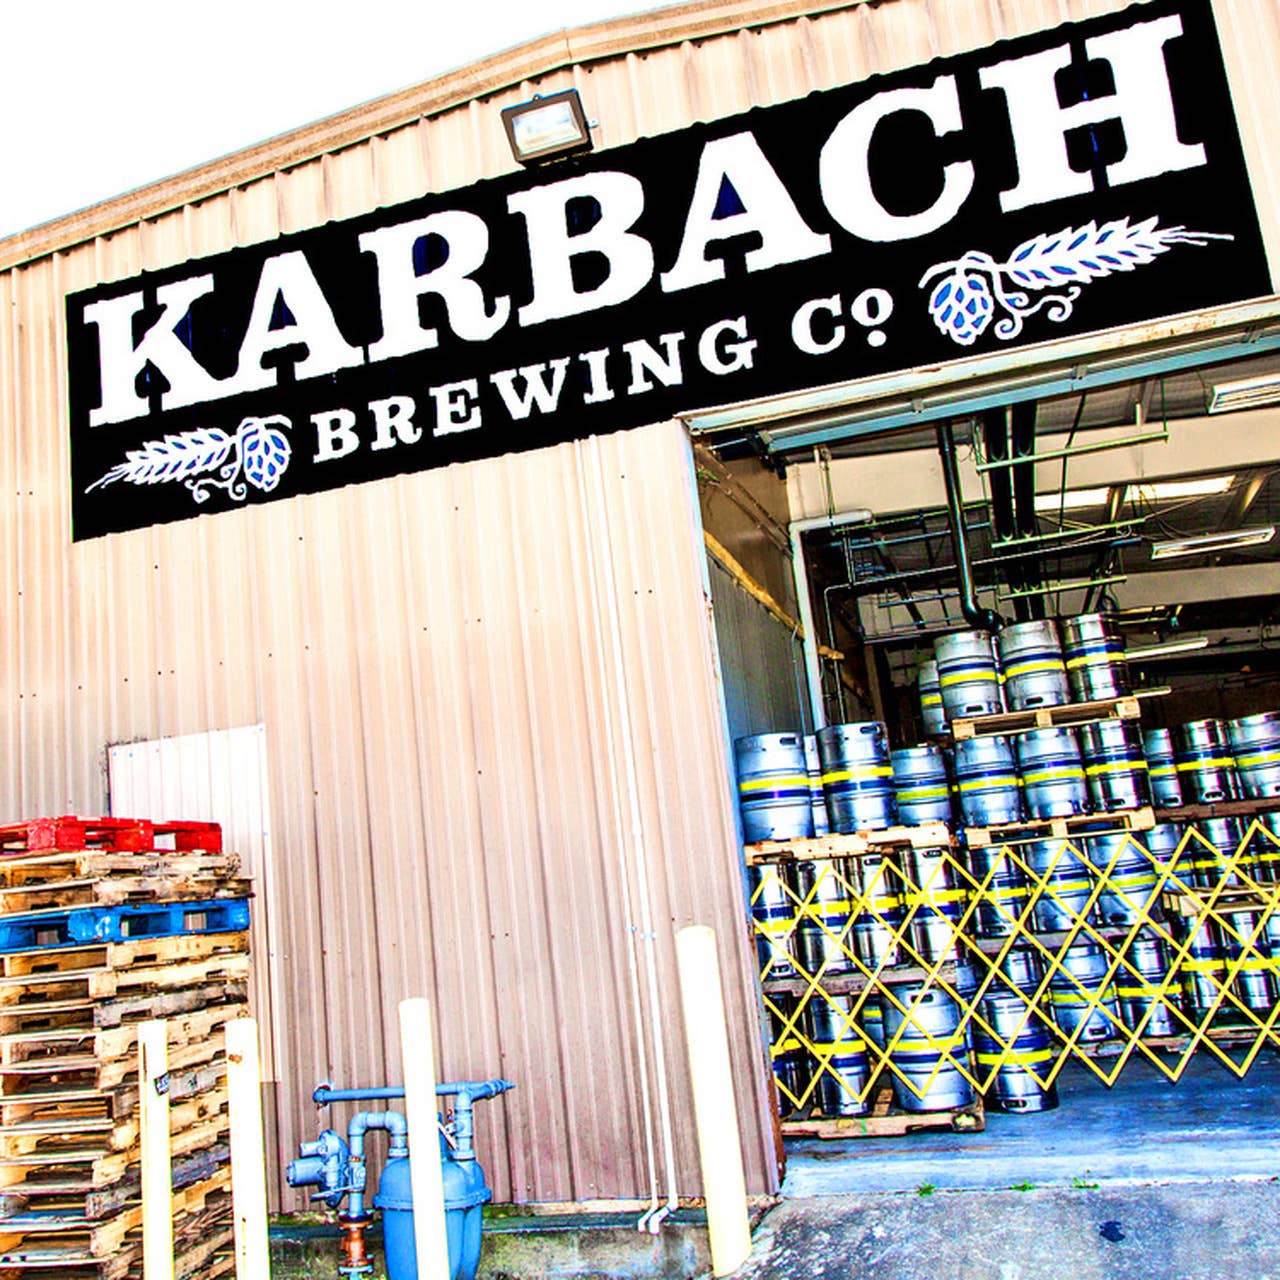 South Austin Gallery - Karbach Brewing Co. Coaster